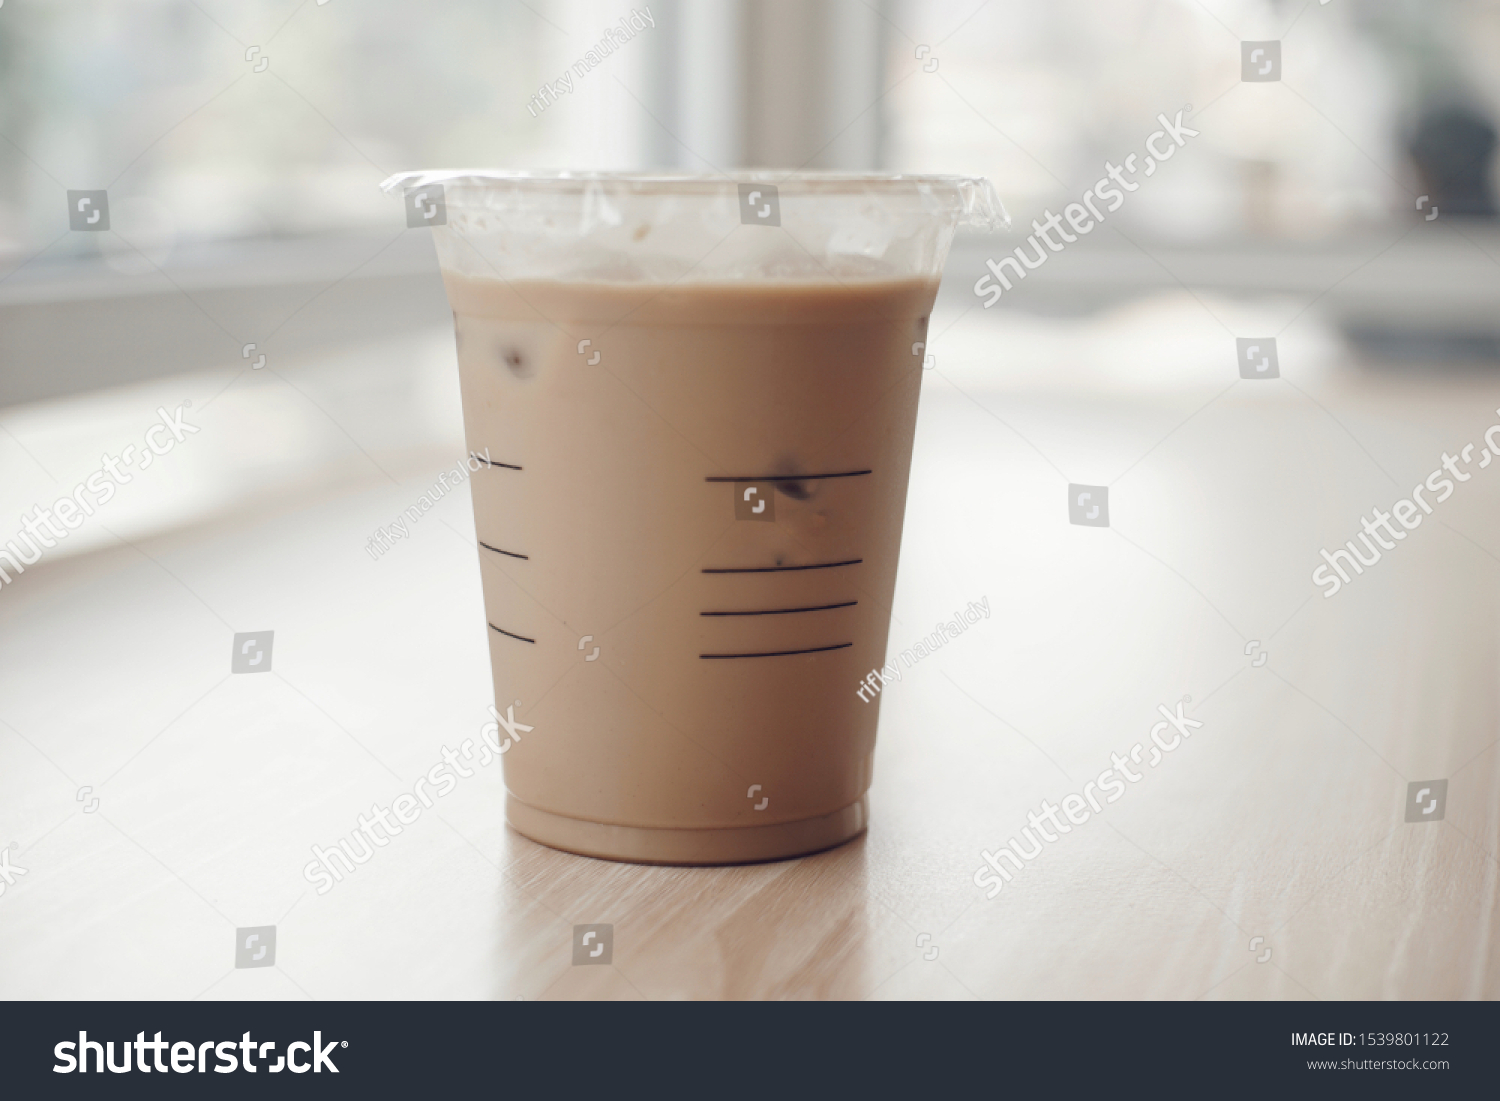 Download Mockup Iced Coffee Milk Plastic Cup Stock Photo Edit Now 1539801122